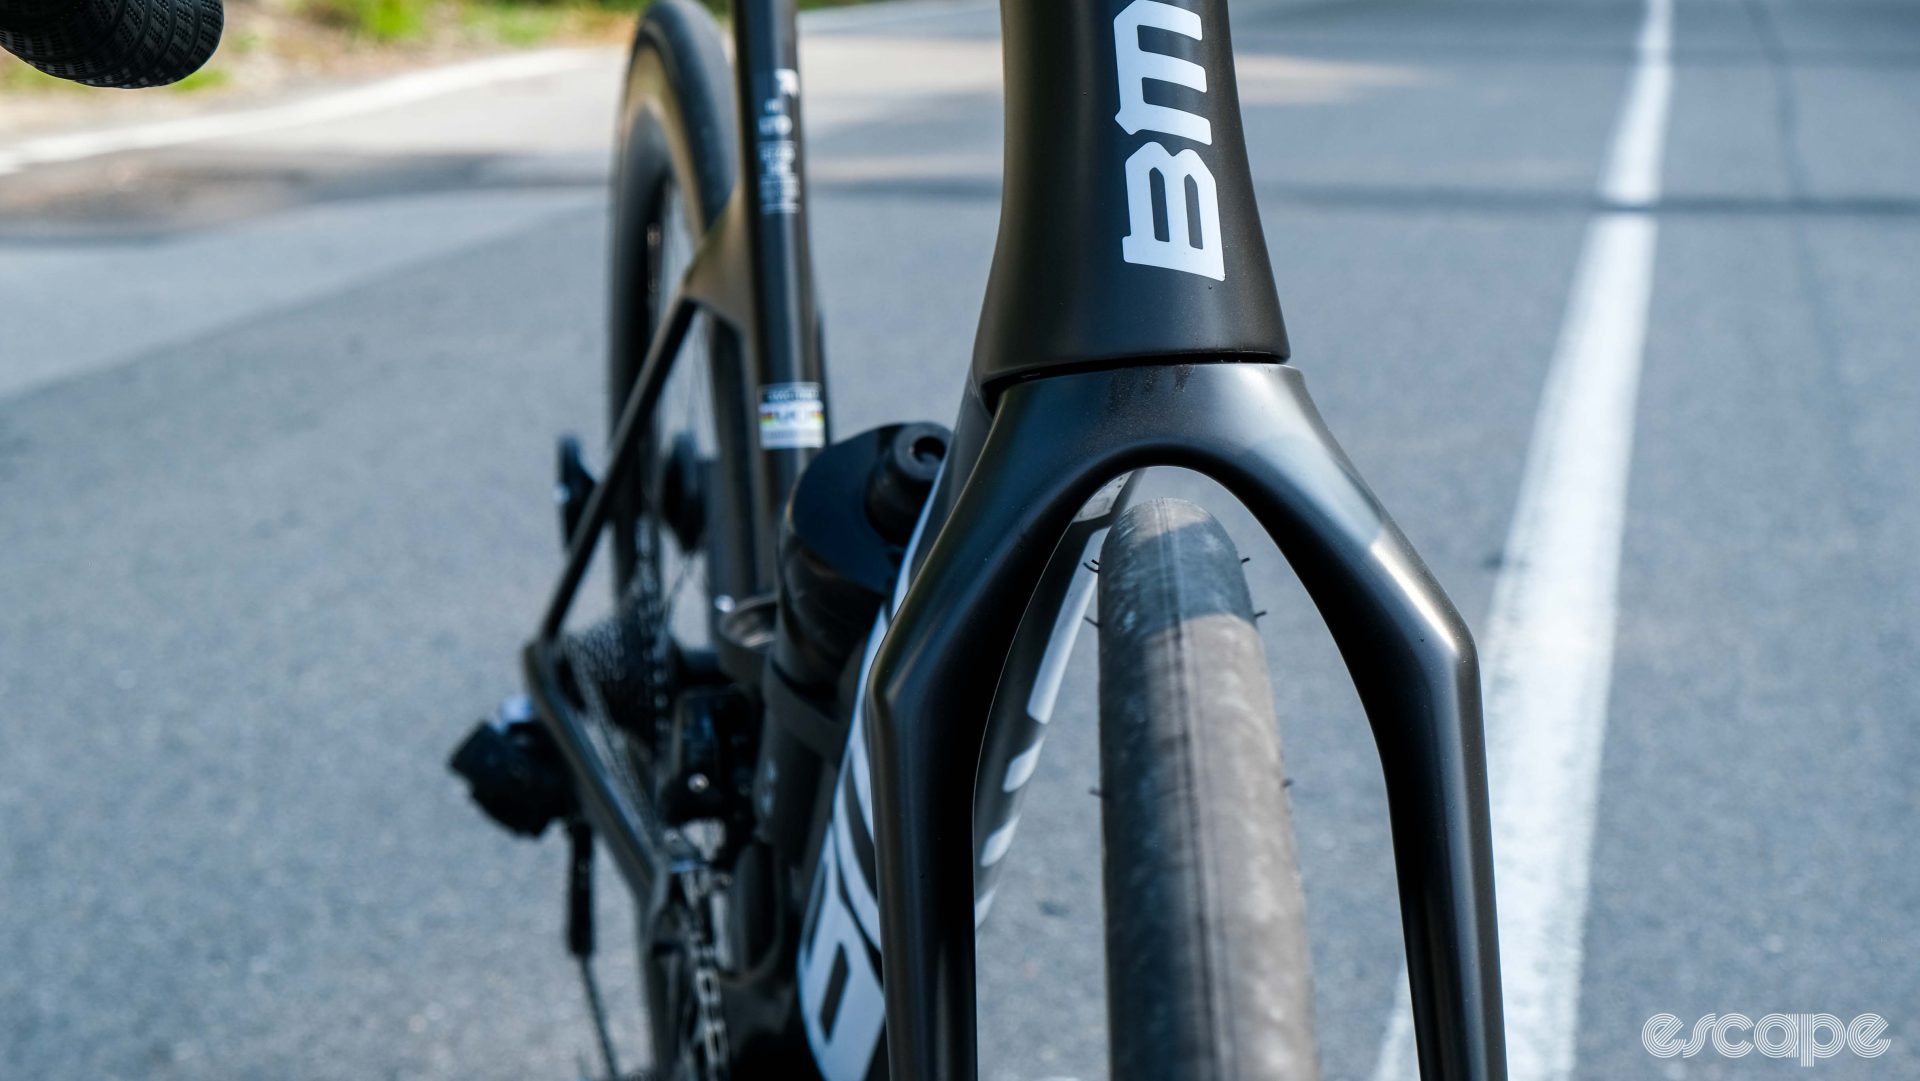 The photo shows the width of the forks on BMC's new TeamMachine R 01 race bike.